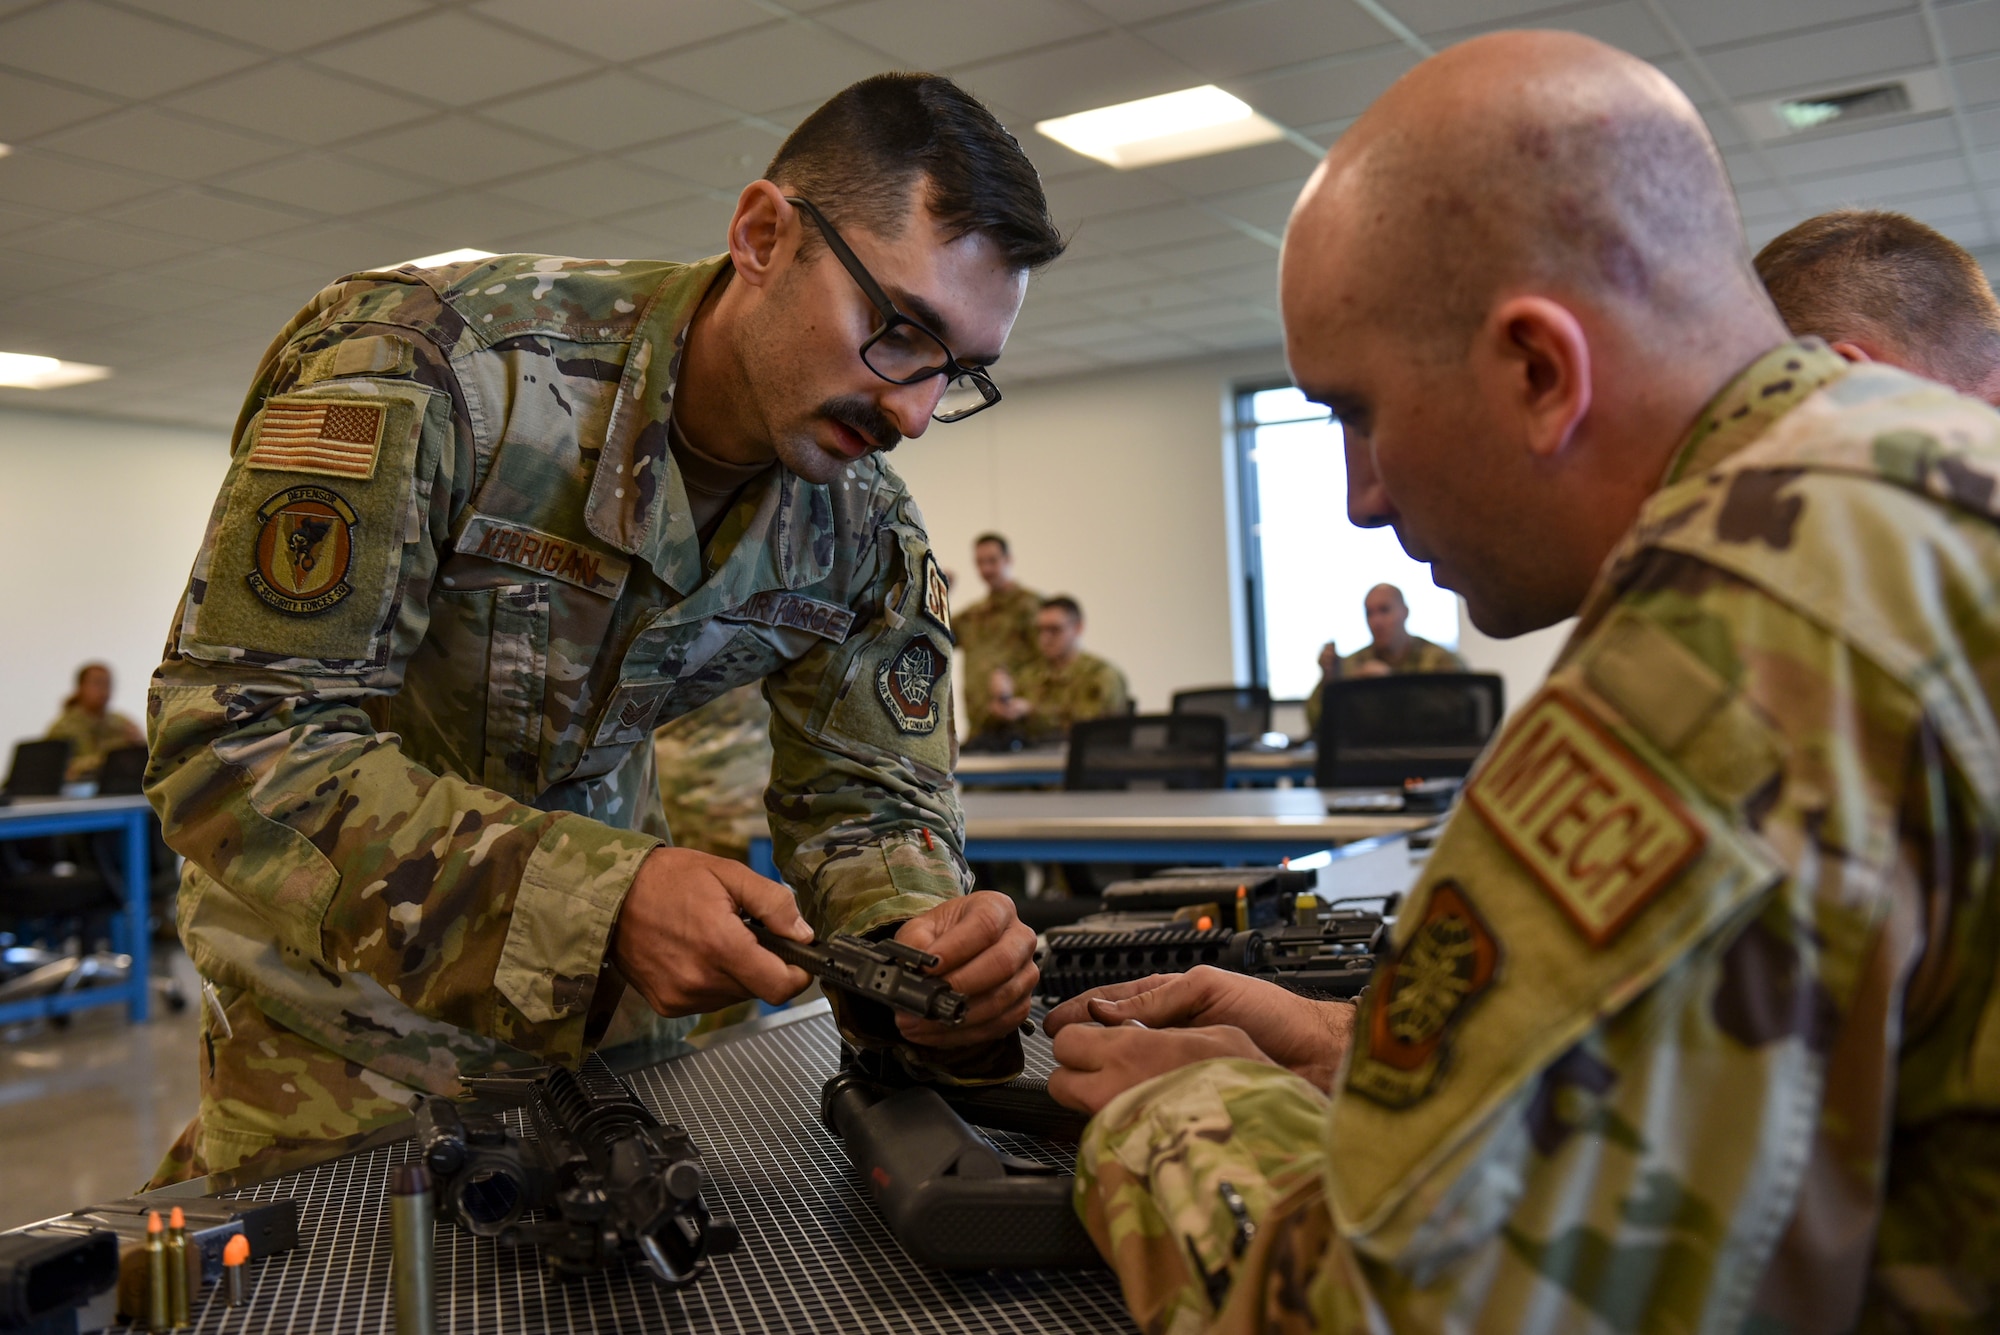 A Combat Arms Instructor assists an Airman in assembling and M4 Carbine rifle.